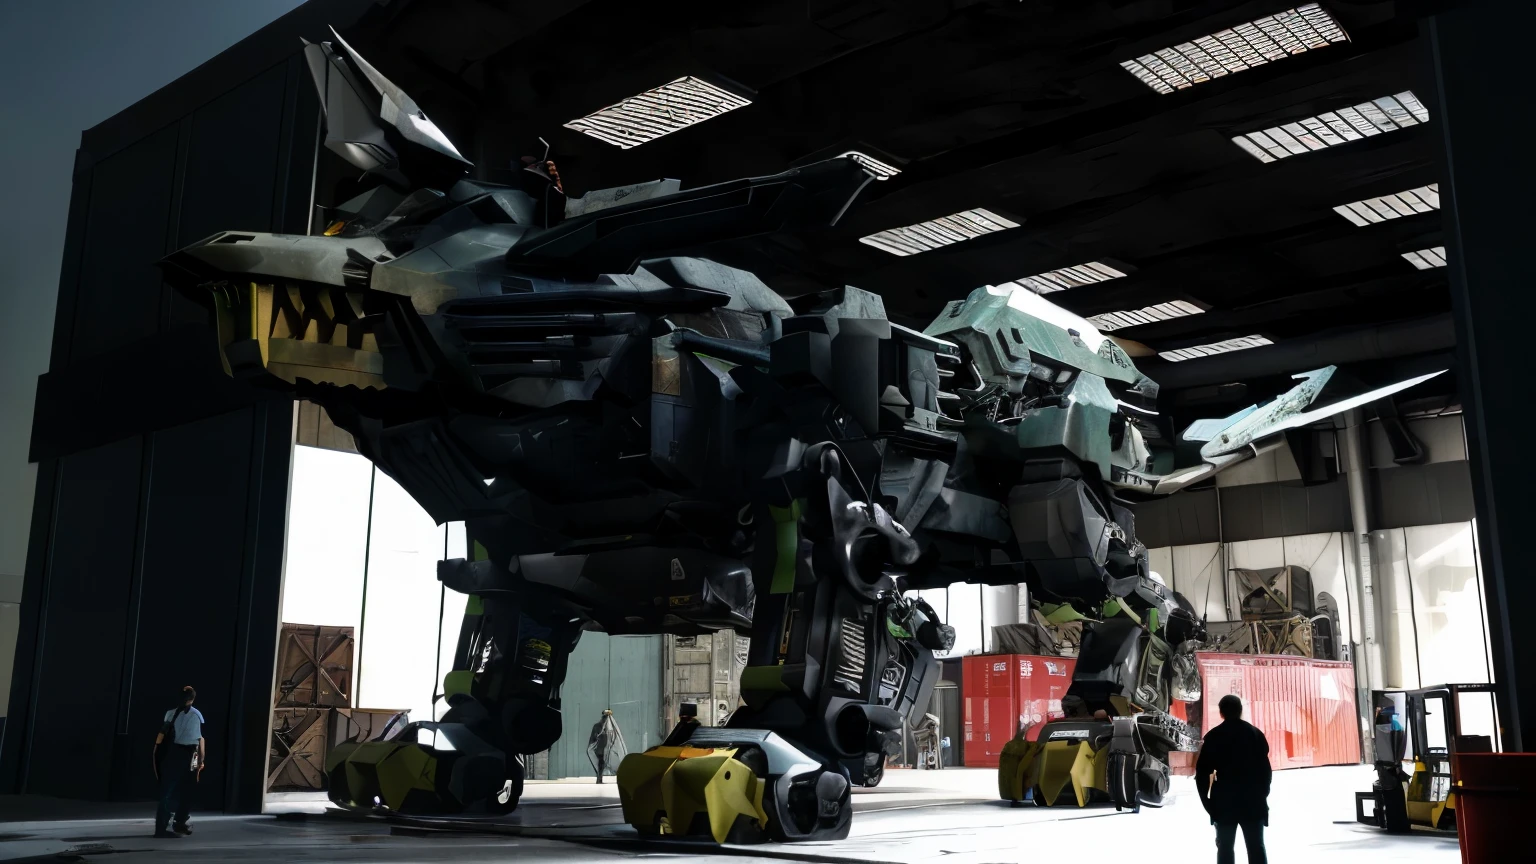 there is a giant robot that is in a hangar building with people, (Zoids), Photo realistic, photo real, hyperrealistic, hyper real, giant mech, good boy giant mecha cat, (well armored mech lion with the cockpit open), big mecha, giant anime mecha, engineers building a giant mecha, mech, an anime large mecha robot, mecha animal, mecha lion, giant mecha robot, giant quadrupedal military robot